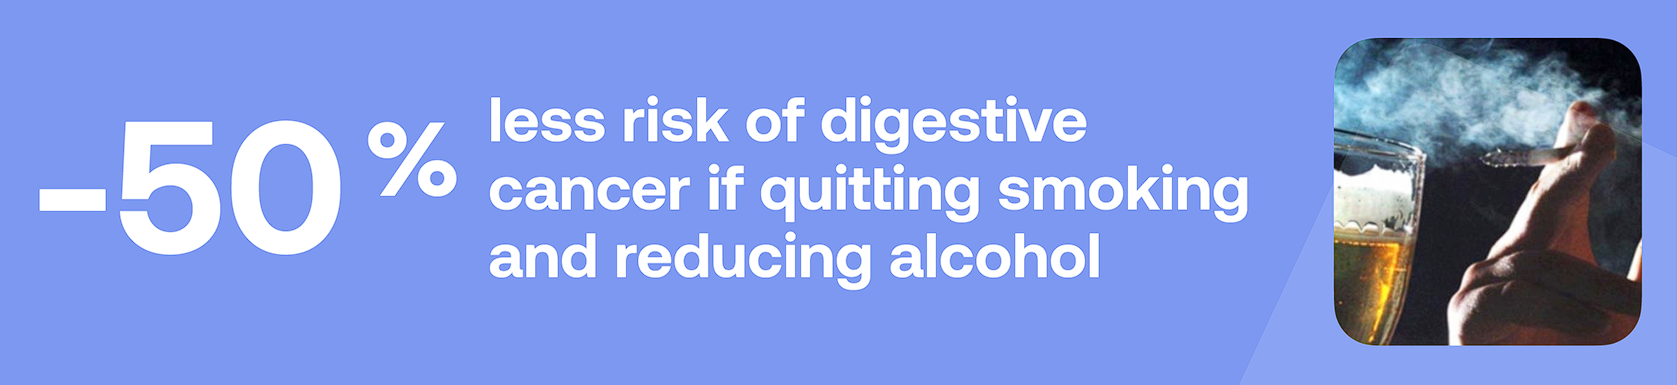 -50% less risk of digestive cancer if quitting smoking and reducing alcohol